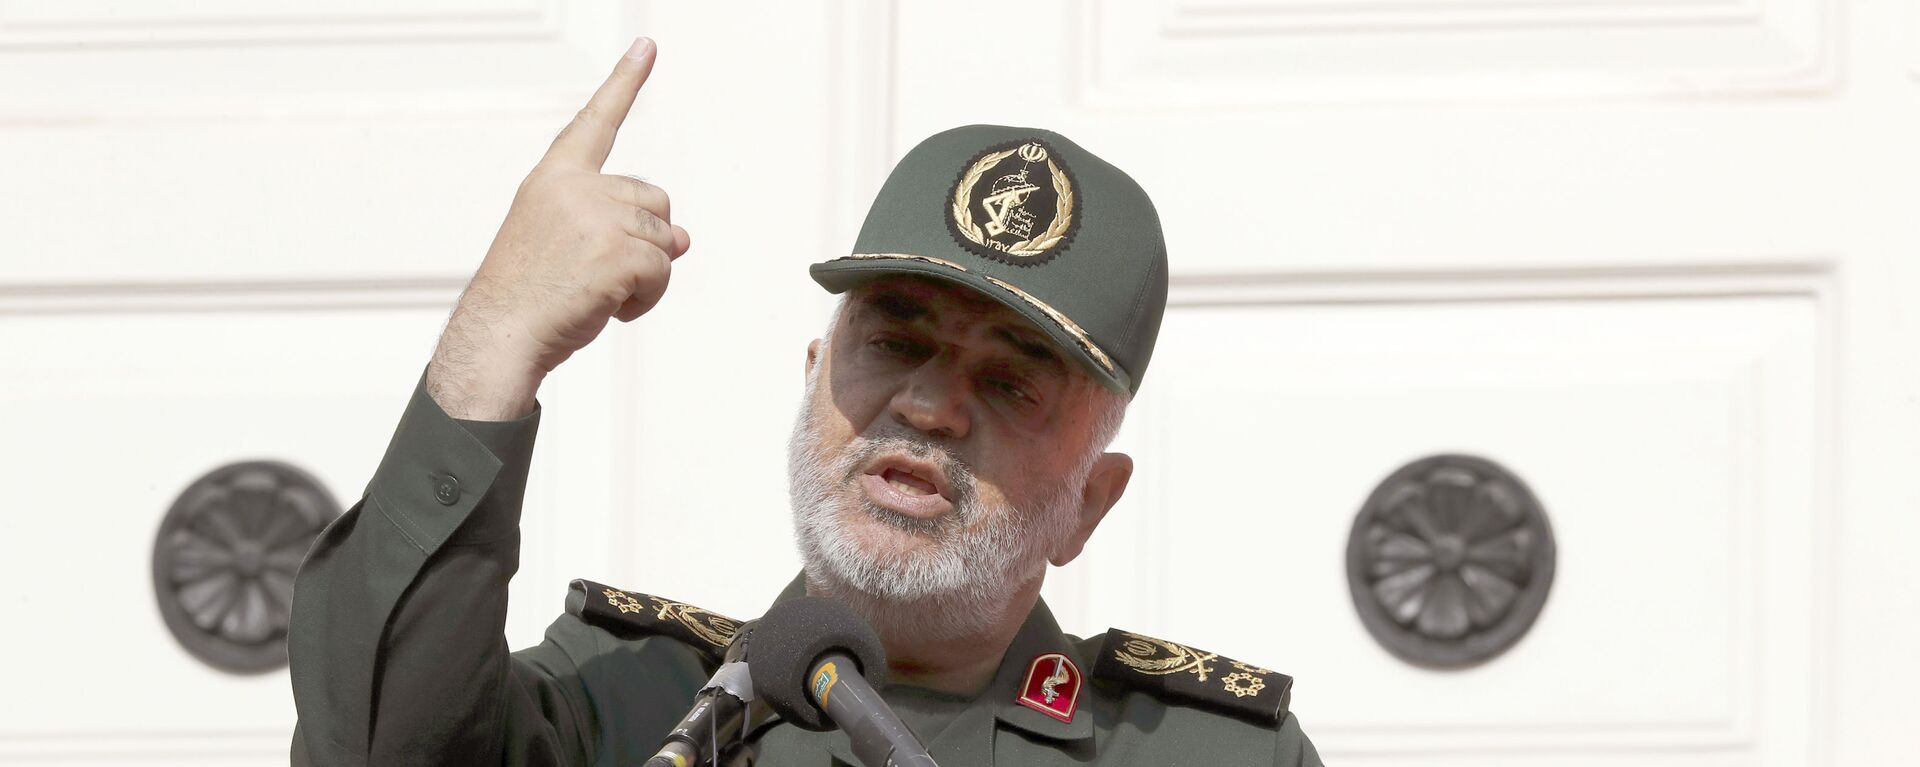 In this 2 November 2019 file photo, Chief of Iran's Revolutionary Guard Gen. Hossein Salami speaks in a ceremony to unveil new anti-U.S. murals painted on the walls of former U.S. embassy in Tehran, Iran. The chief of Iran's powerful Revolutionary Guard warned 27 January 2020,  that it will retaliate against American and Israeli commanders if the U.S. continues to threaten top Iranian generals. “I warn them to withdraw from this field,” Gen. Hossein Salami told state television, adding if they do not, they “will definitely regret it.”  - Sputnik International, 1920, 07.08.2021